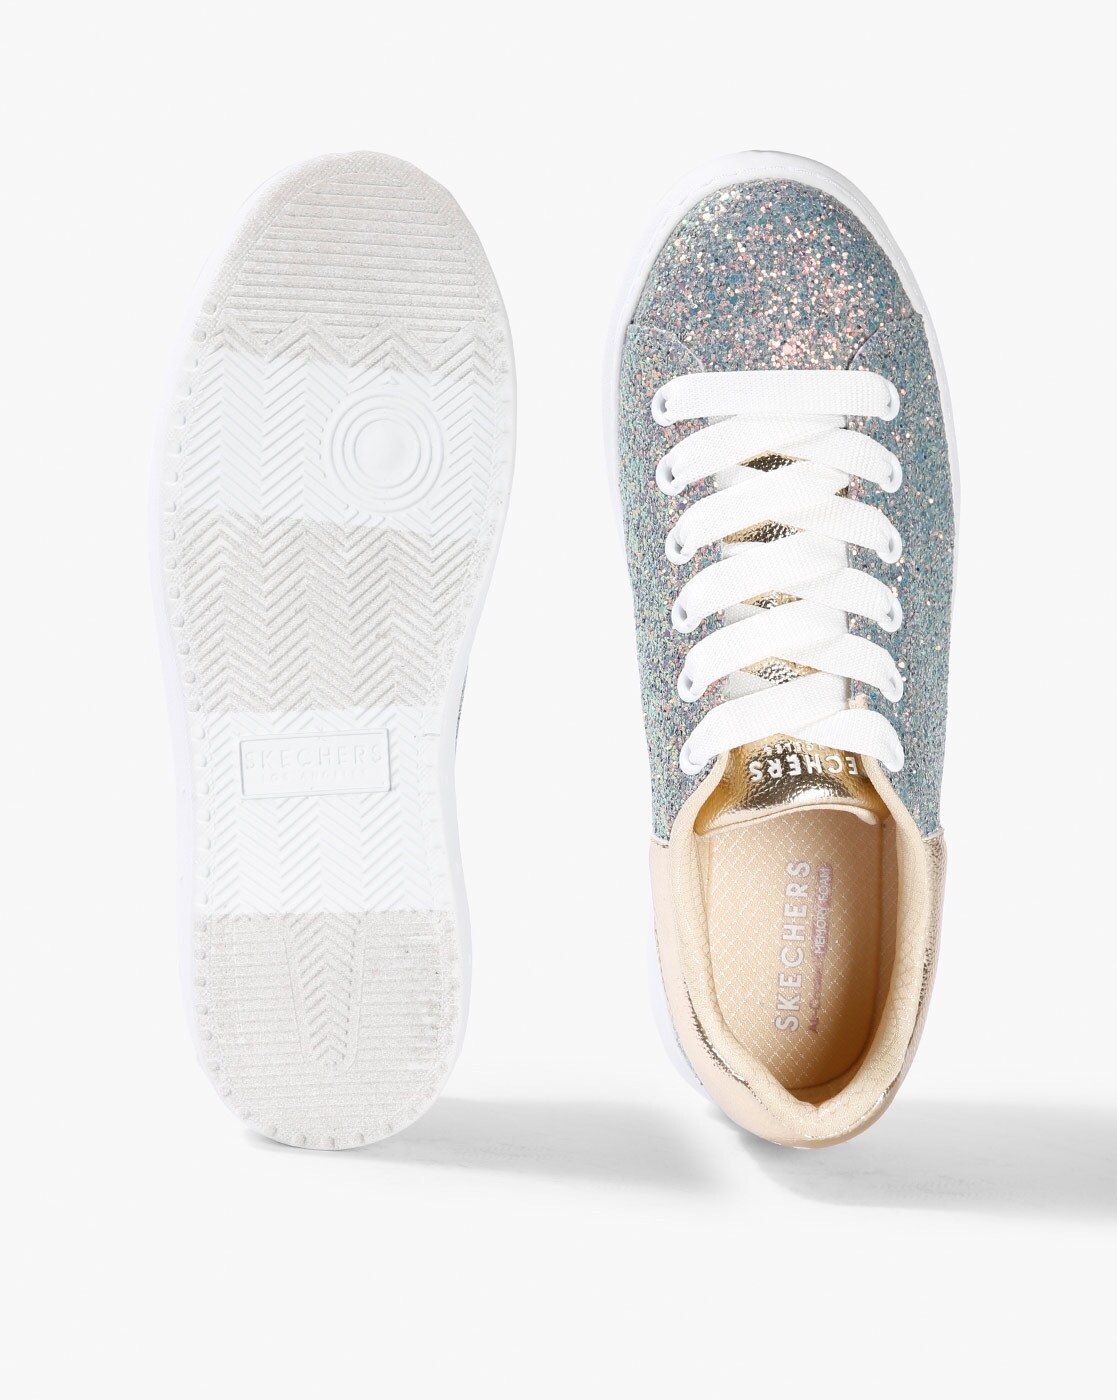 Womens Glitter Sparkling Sneakers With Encrusted White Sole Fashionable  Street Skechers Shoes For Women G220629 From Liancheng06, $27.41 |  DHgate.Com